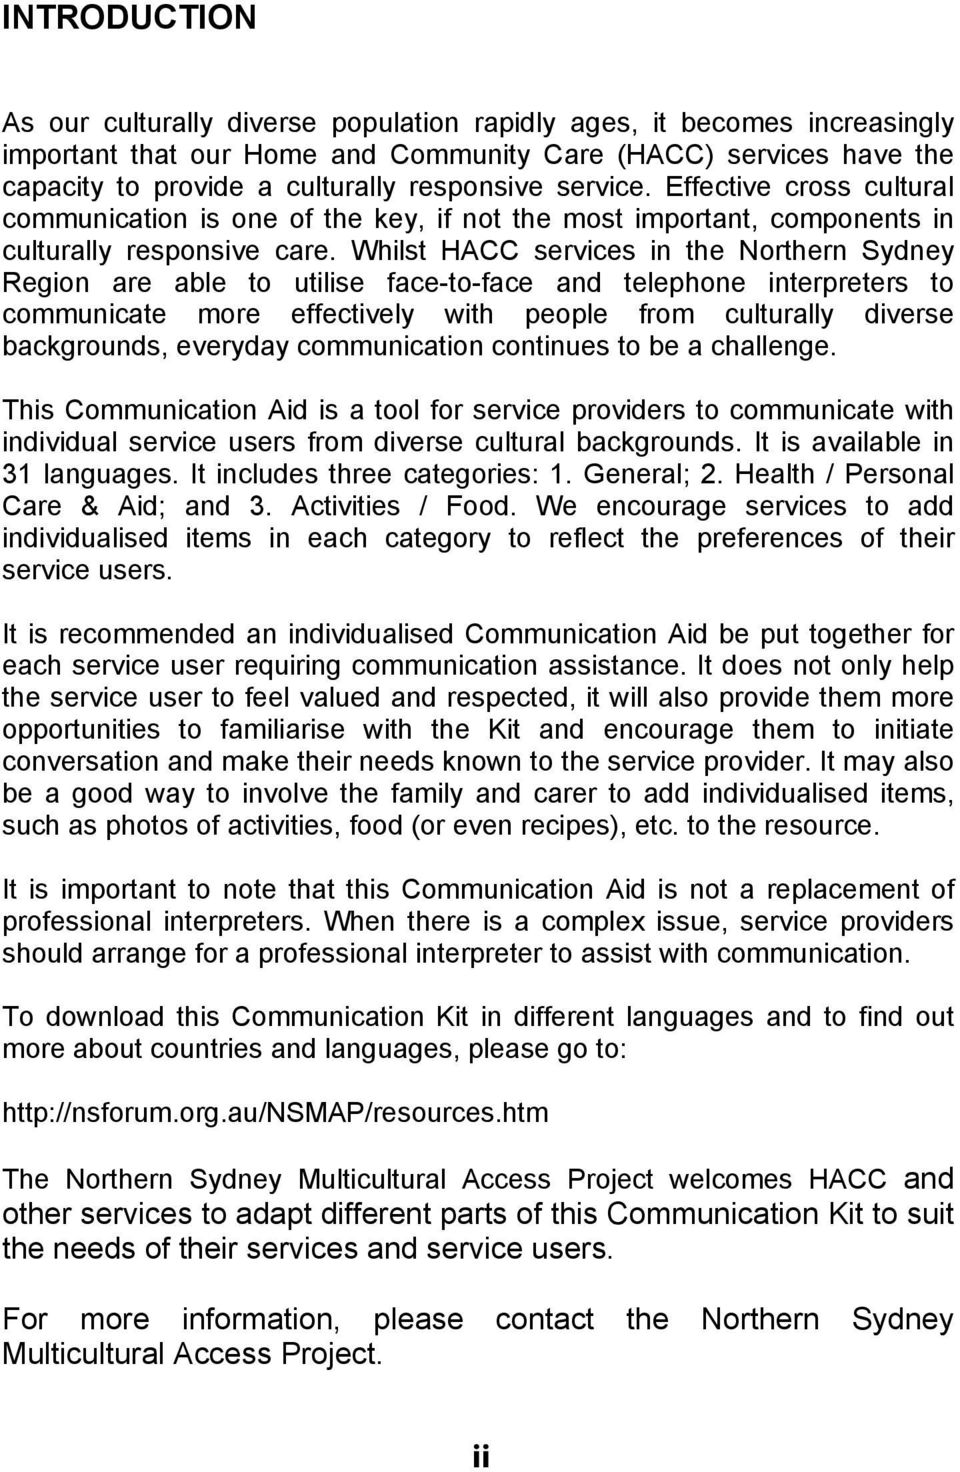 Whilst HACC services in the Northern Sydney Region are able to utilise face-to-face and telephone interpreters to communicate more effectively with people from culturally diverse backgrounds,